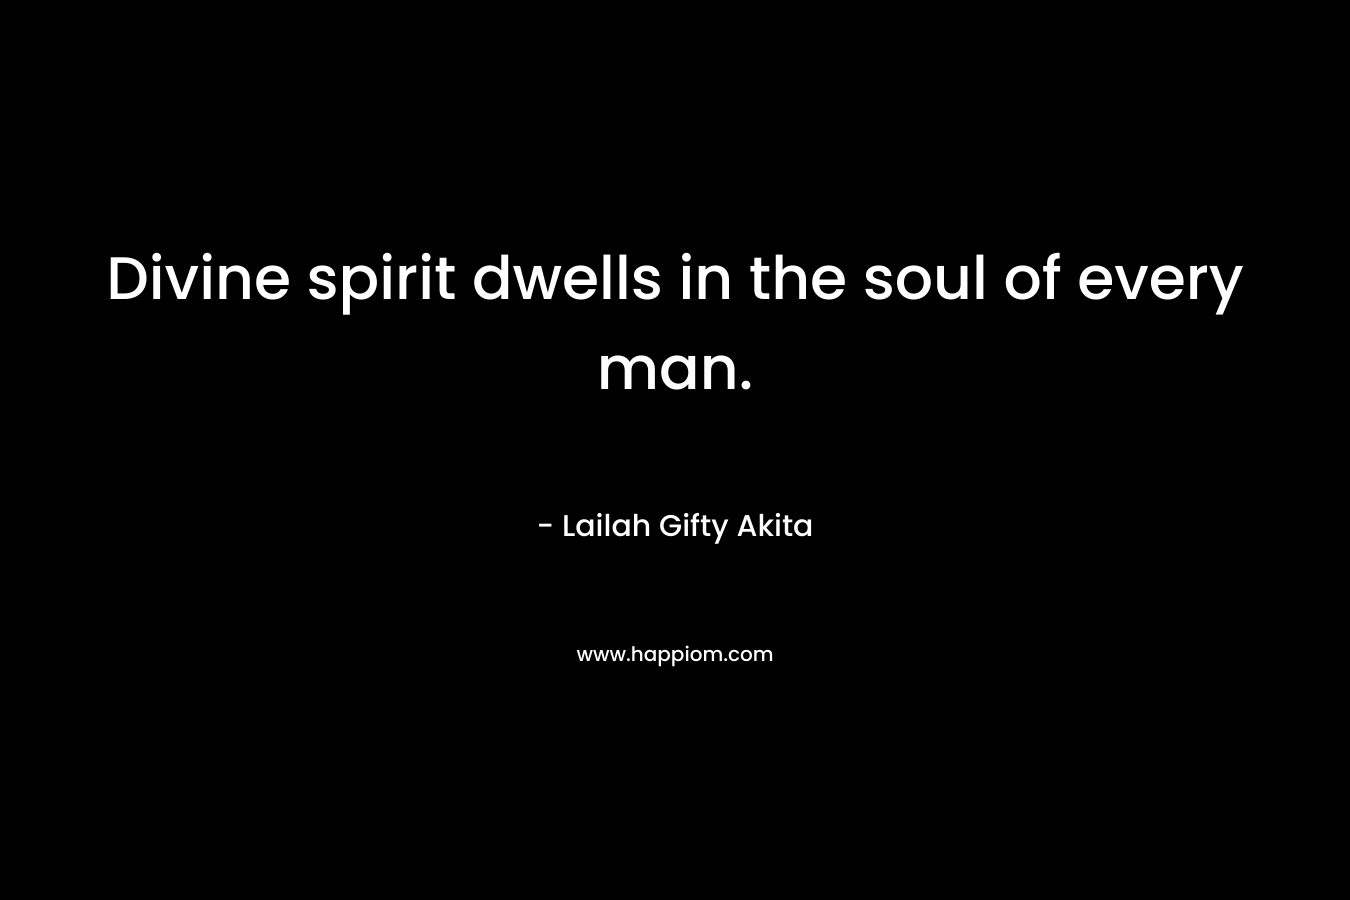 Divine spirit dwells in the soul of every man.